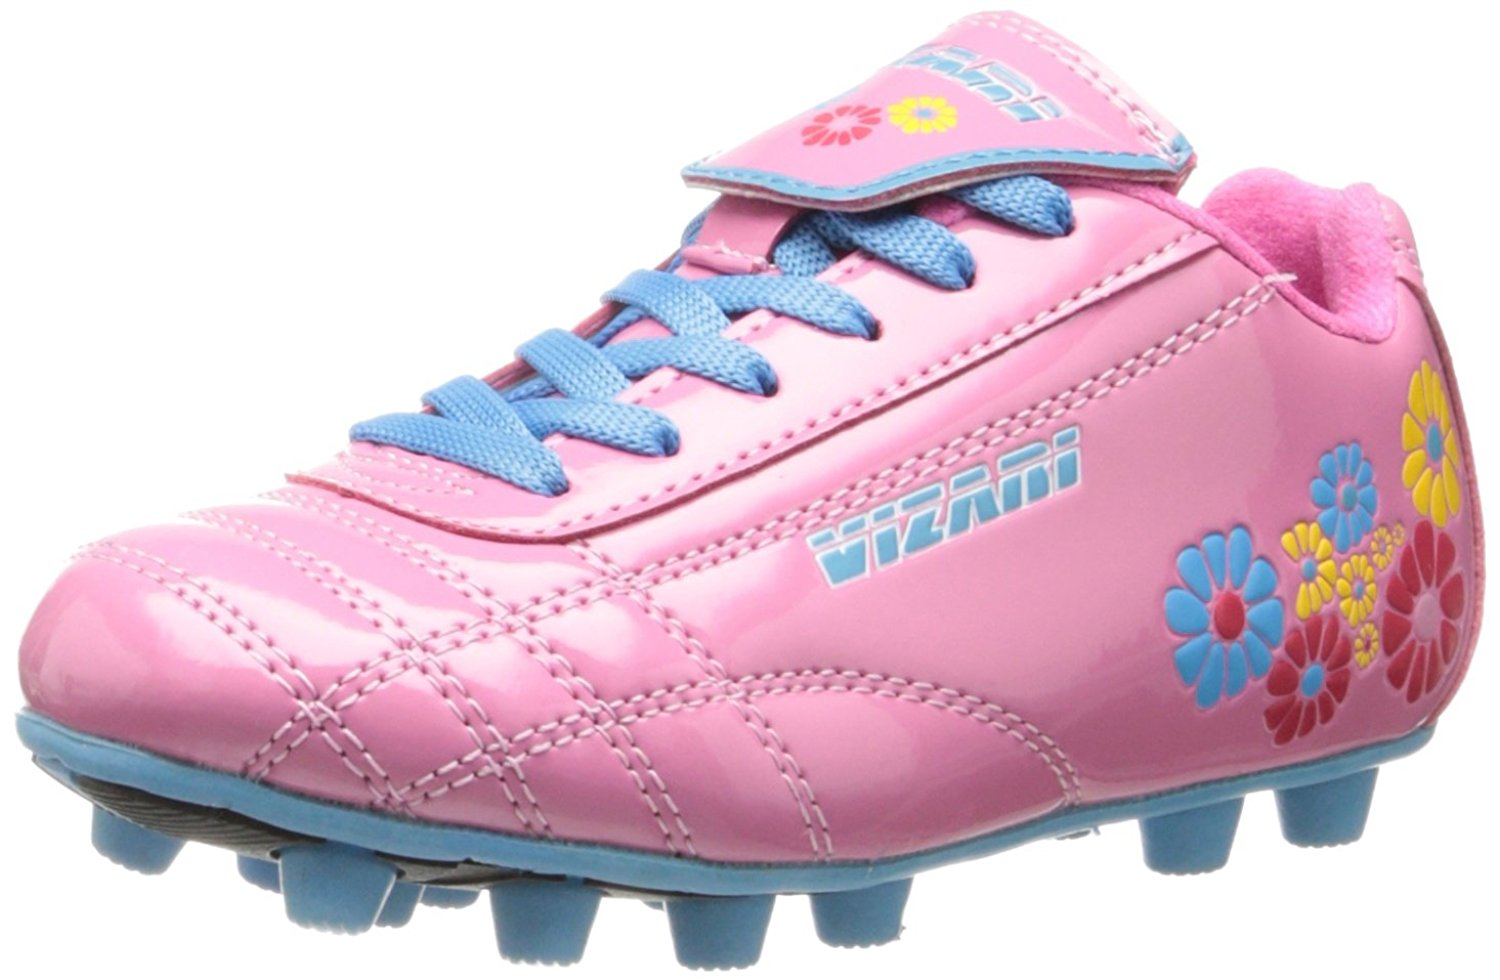 soccer sneakers for toddlers